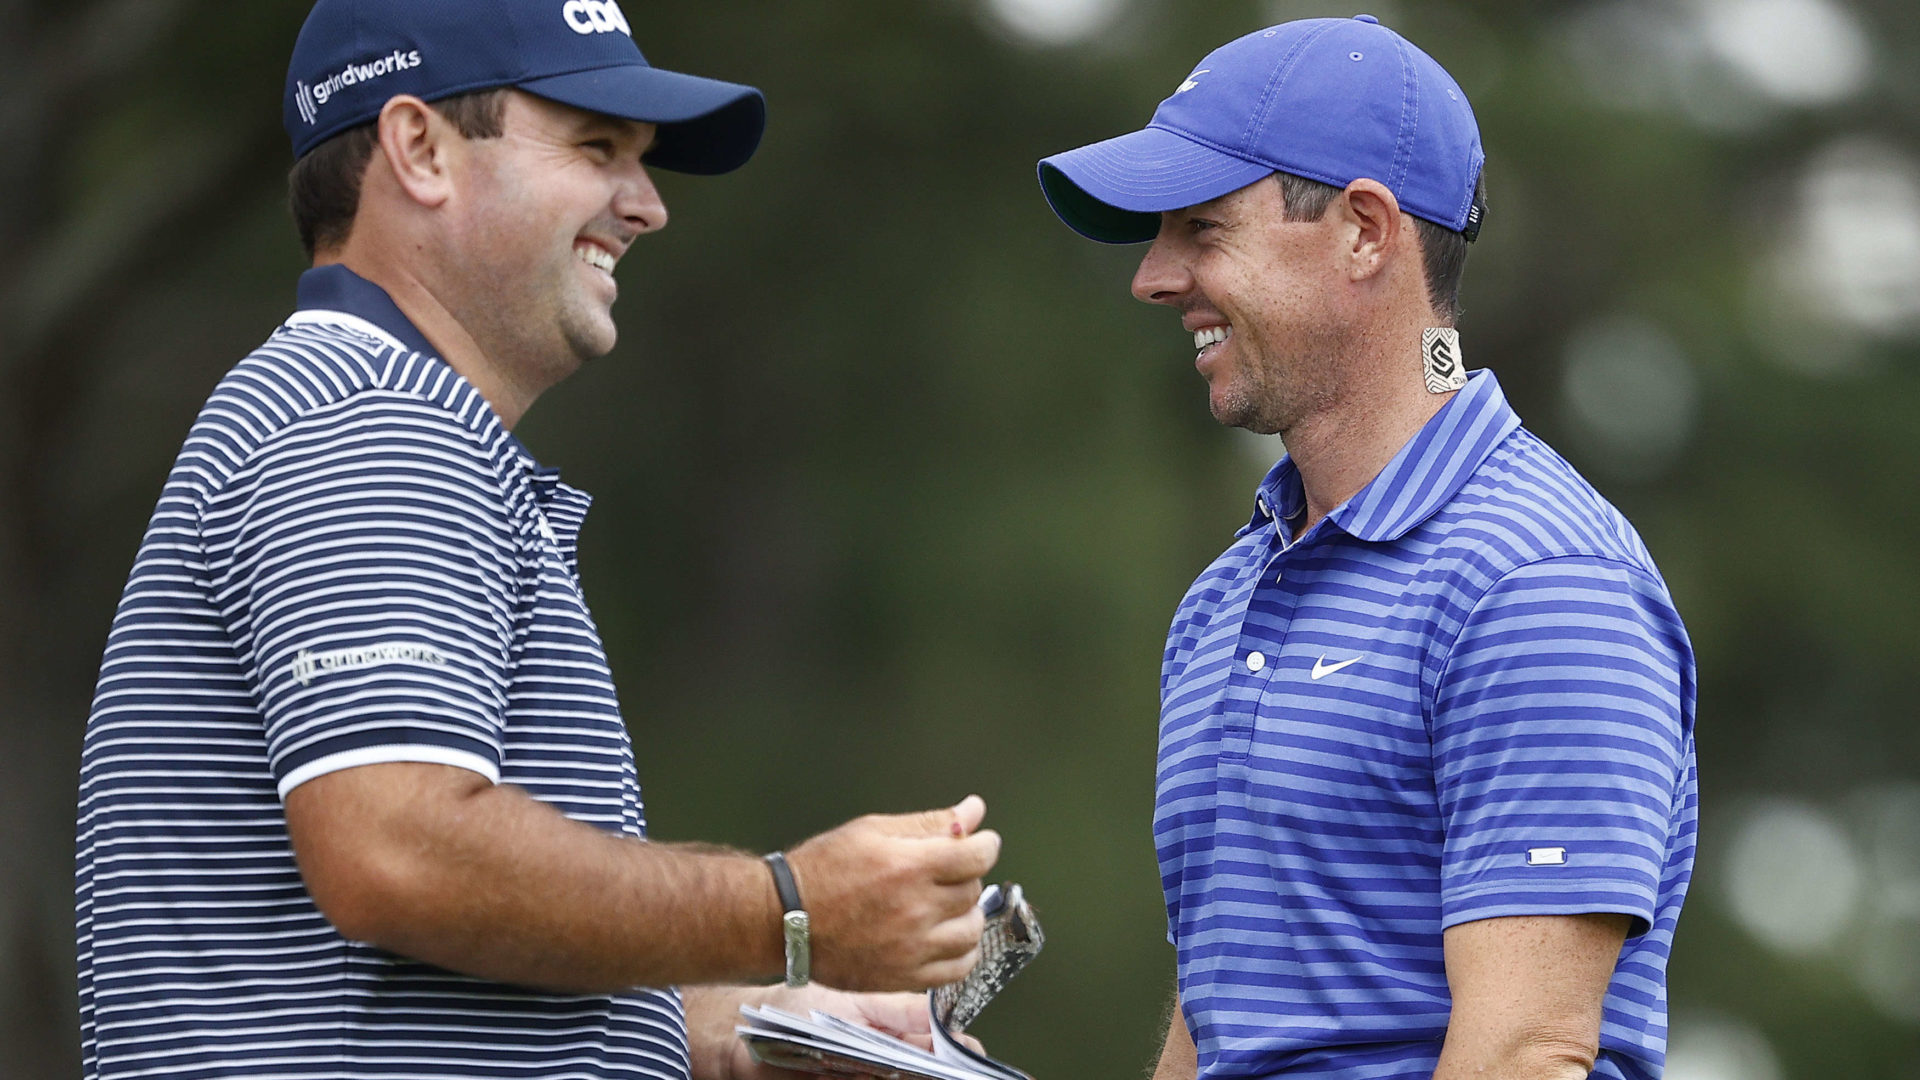 CHARLOTTE, NORTH CAROLINA - MAY 06: (L-R) Patrick Reed of the United States and Rory McIlroy of Northern Ireland smile on the ninth green during the first round of the 2021 Wells Fargo Championship at Quail Hollow Club on May 06, 2021 in Charlotte, North Carolina. (Photo by Maddie Meyer/Getty Images)